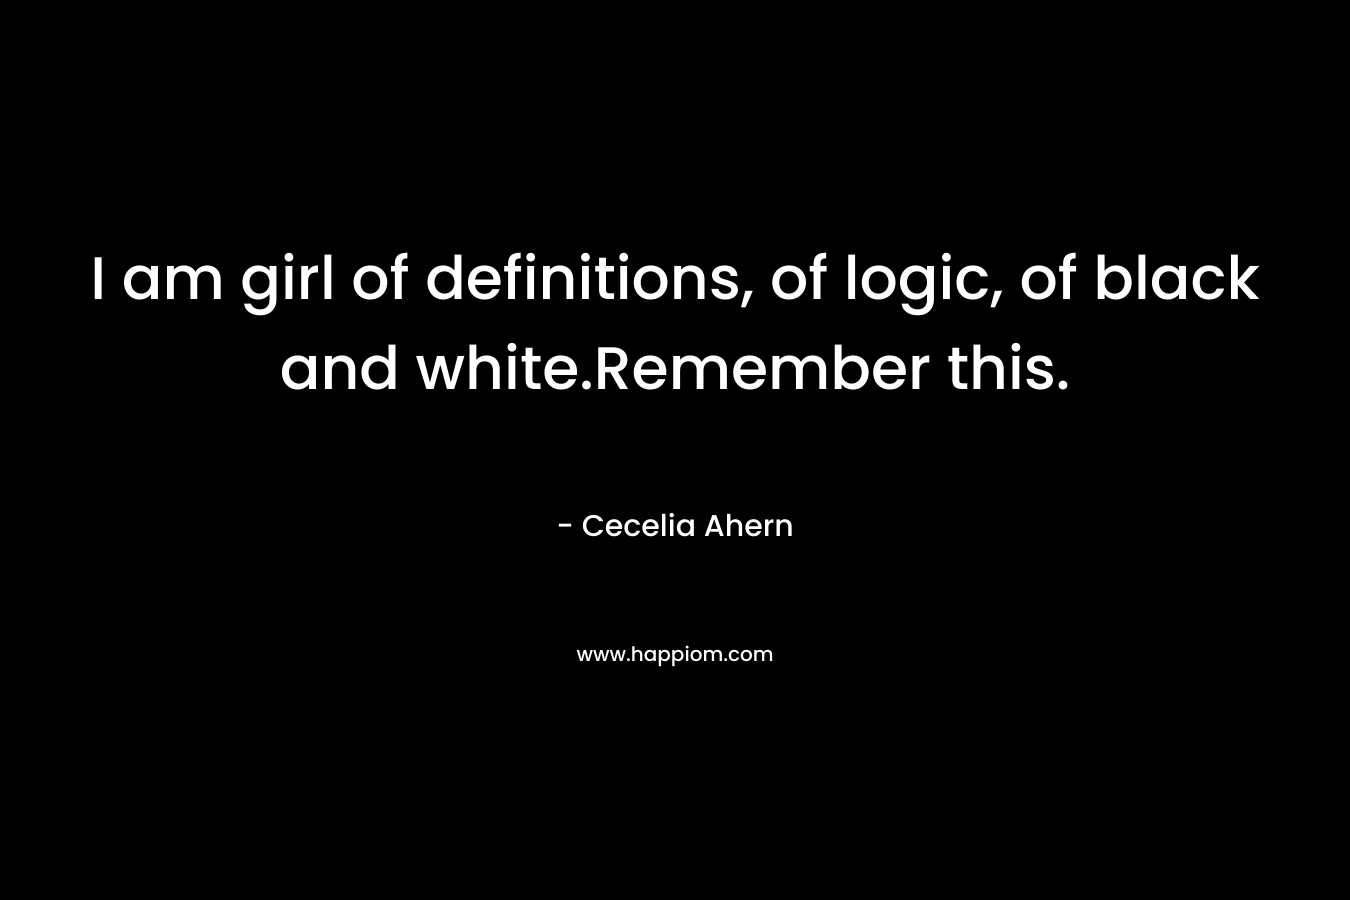 I am girl of definitions, of logic, of black and white.Remember this.